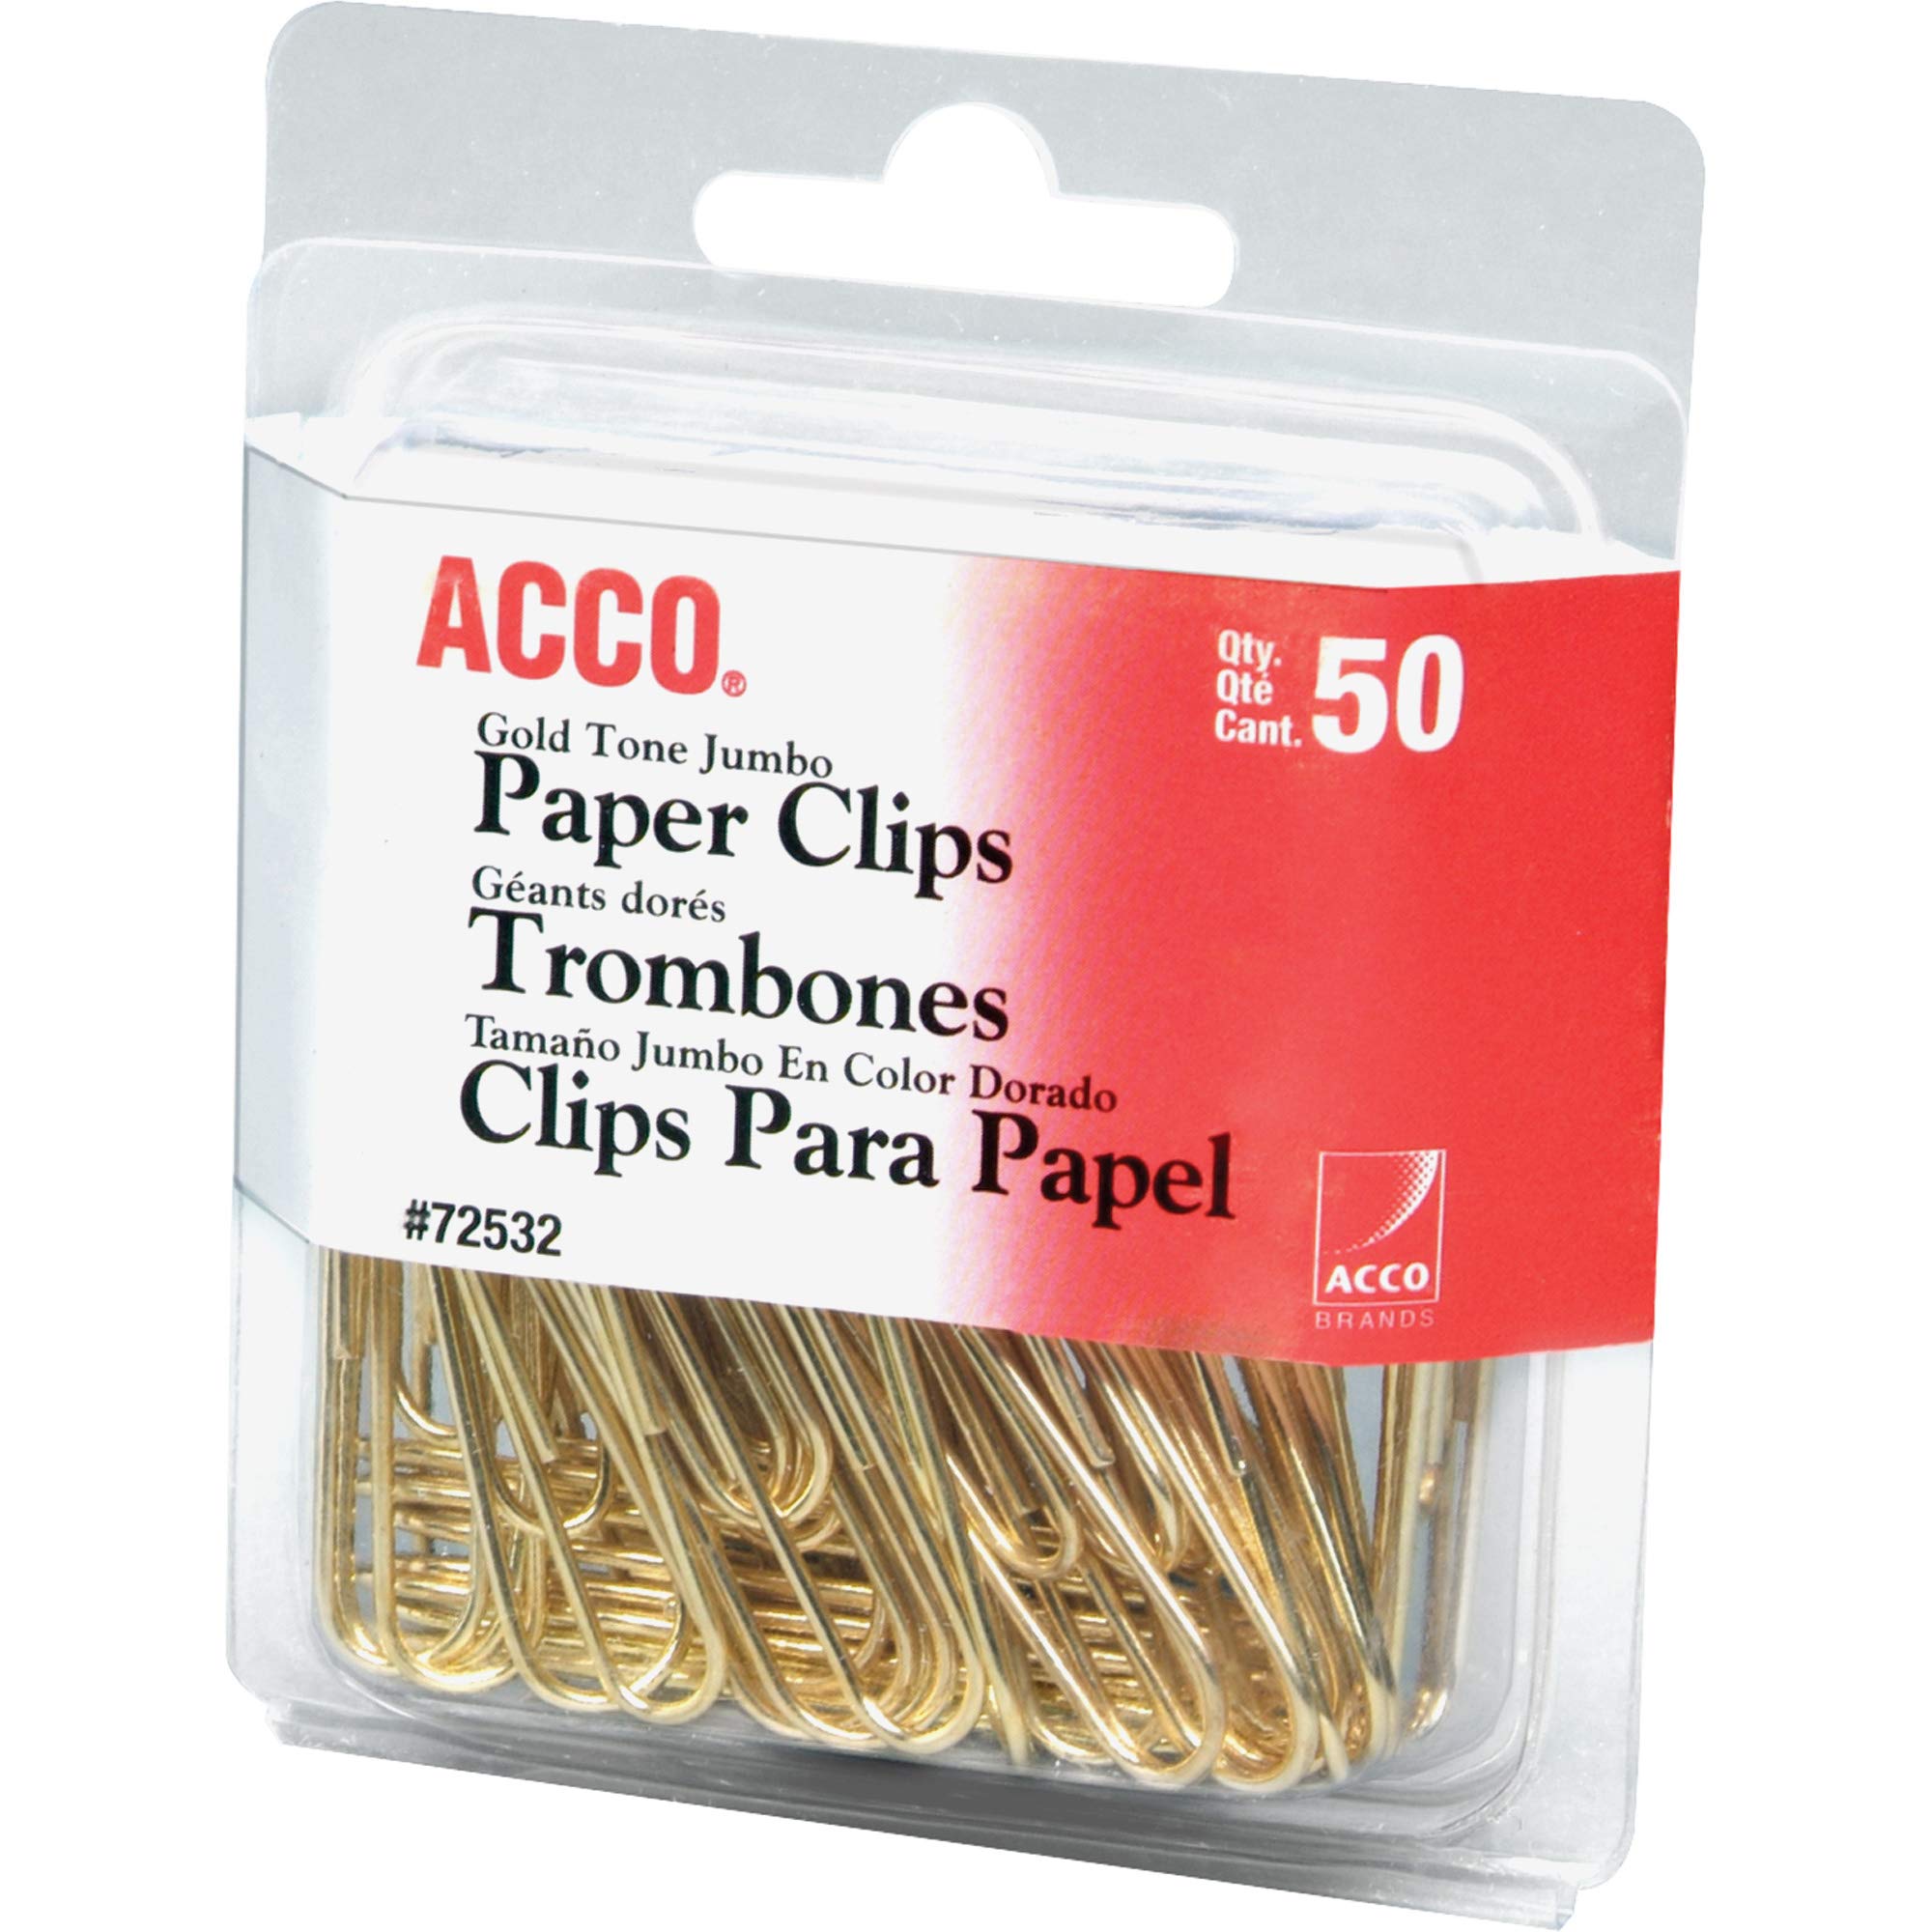 Book Cover ACCO Paper Clips, Jumbo, Smooth, Gold, 50 Clips/Box (72532)